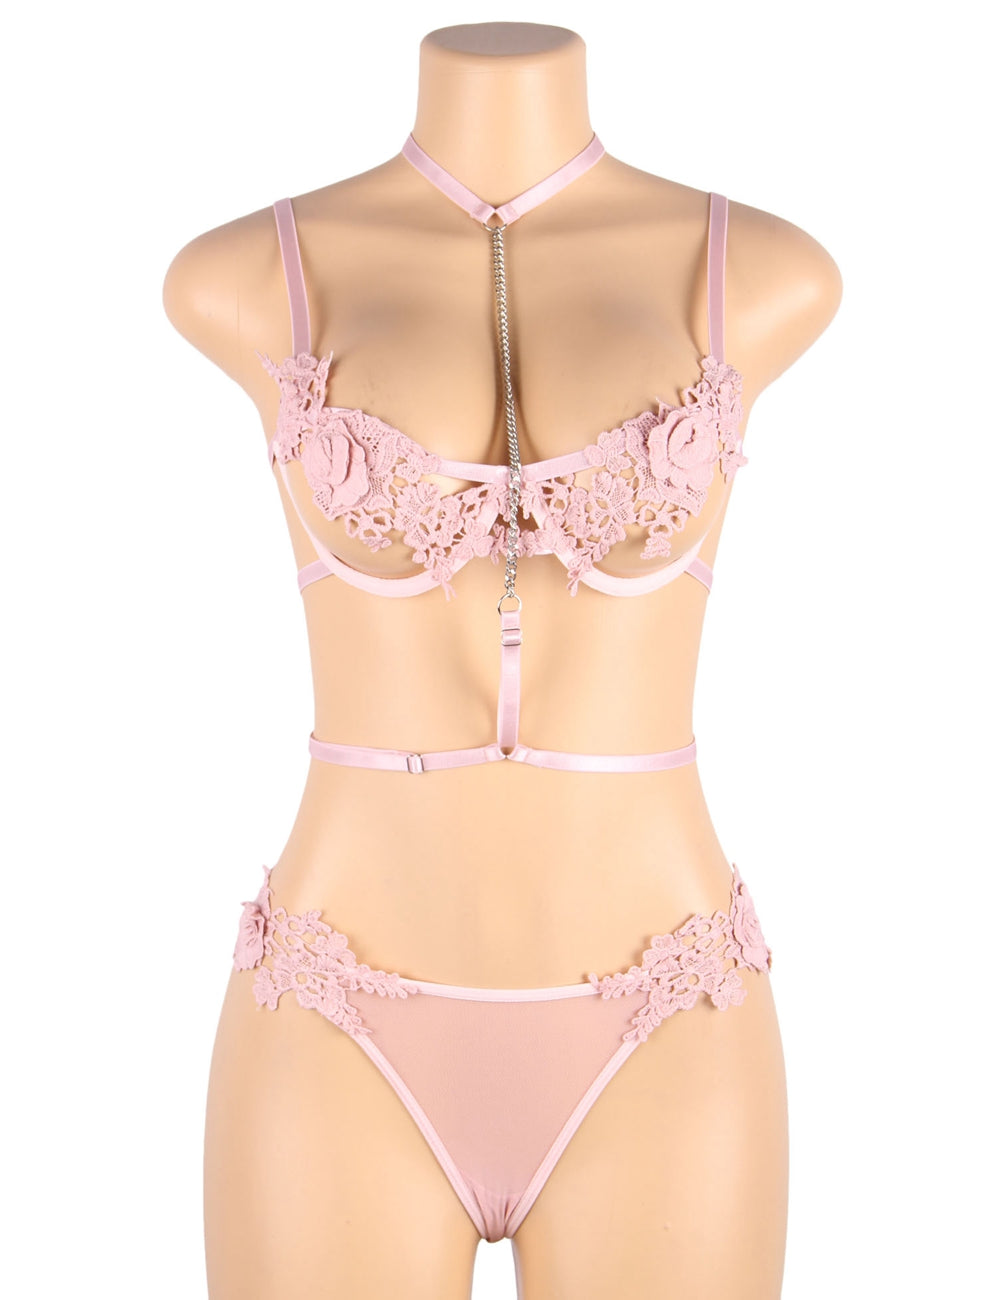 Lingerie Set Sheer Bra and Panty Set Chain Halter Stylish Sexy Bra And Panties For Women